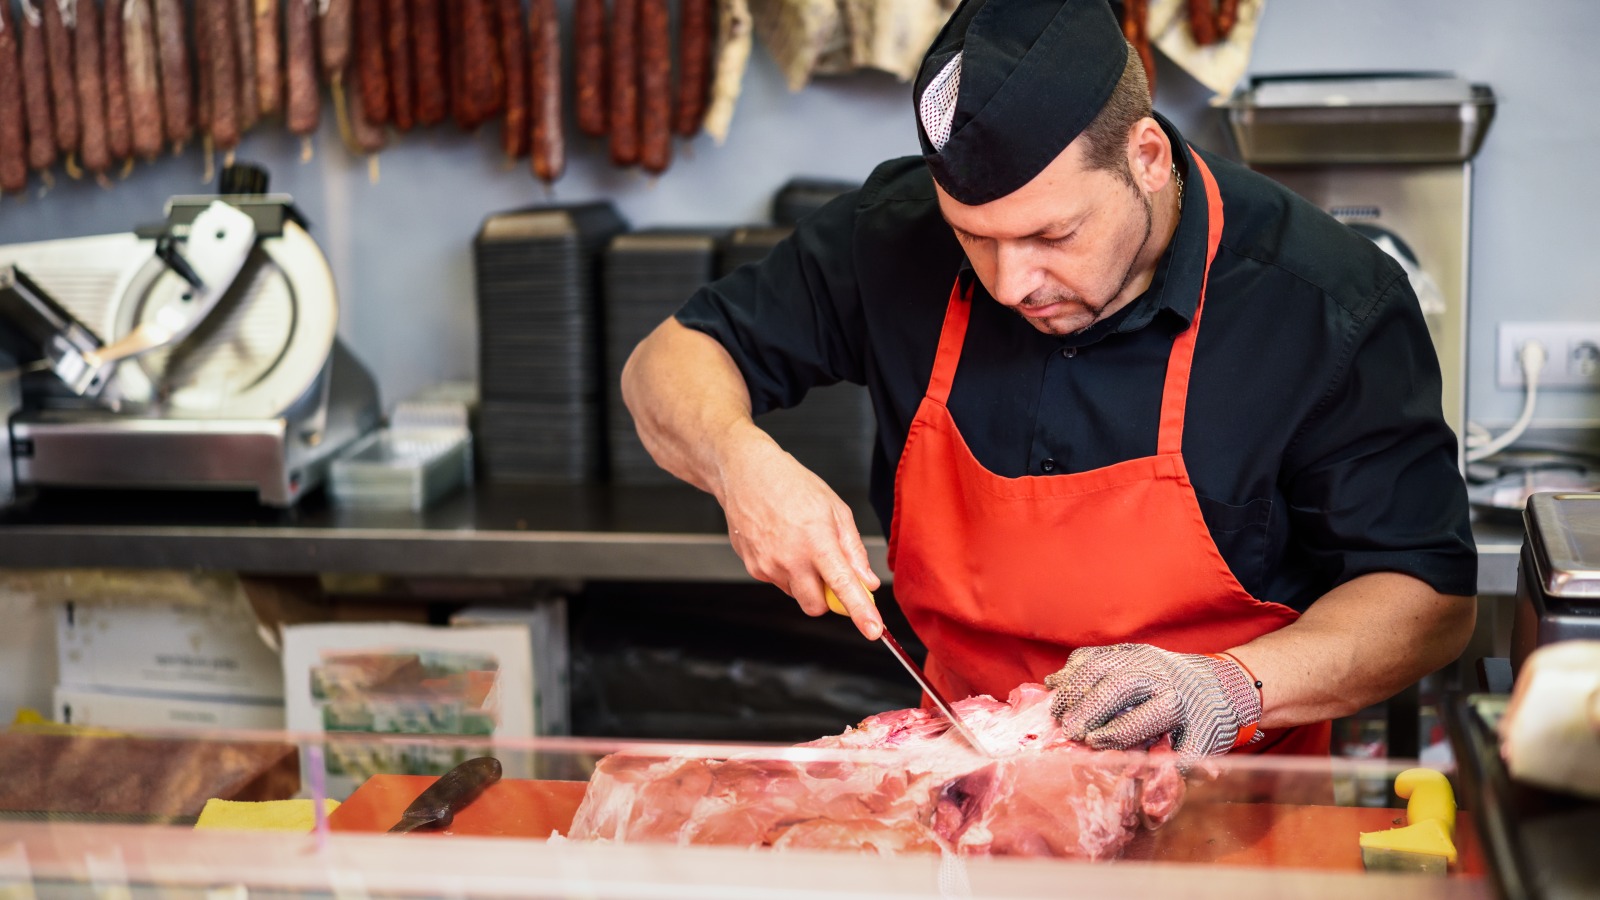 Why You Should Make An Effort To Only Get Your Meat From A Butcher